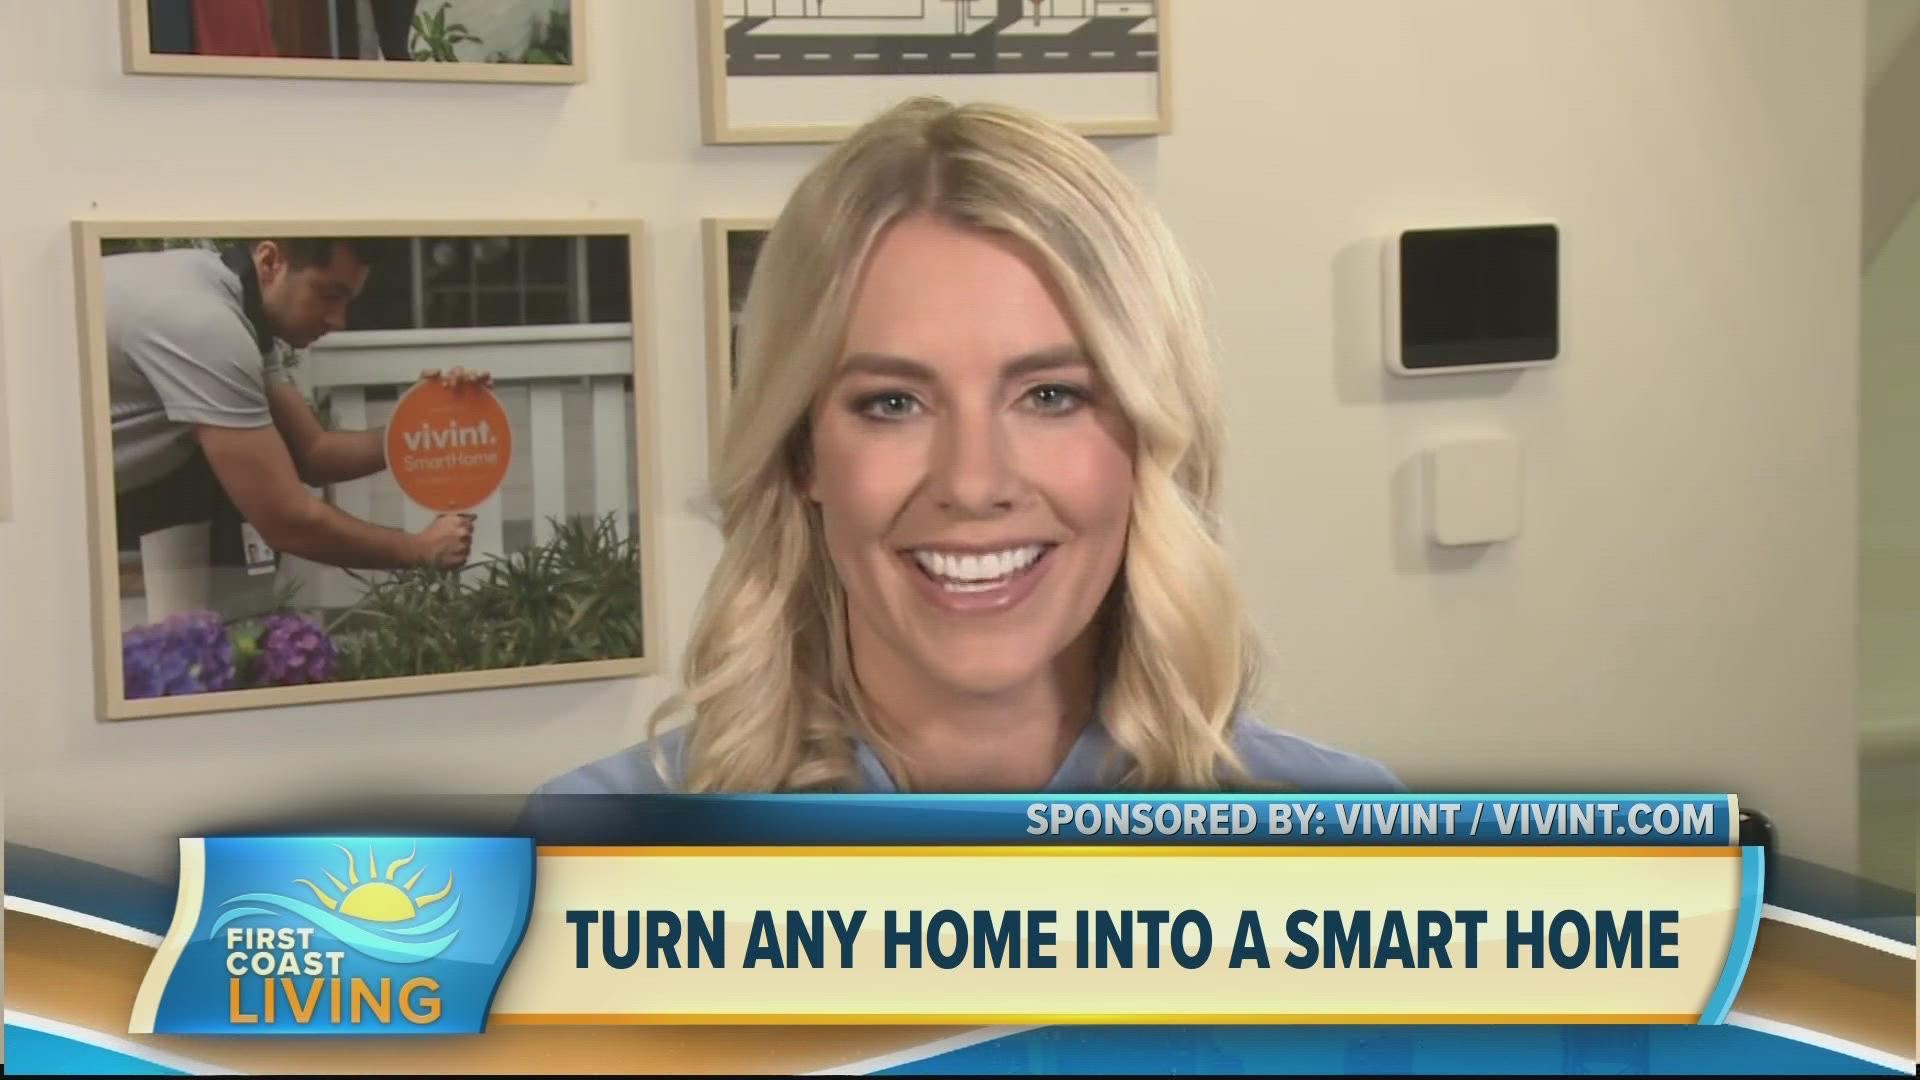 Smart home expert at Vivint, Kristin Kenney shows how easy it is to turn any home into a smart home with these latest innovations.